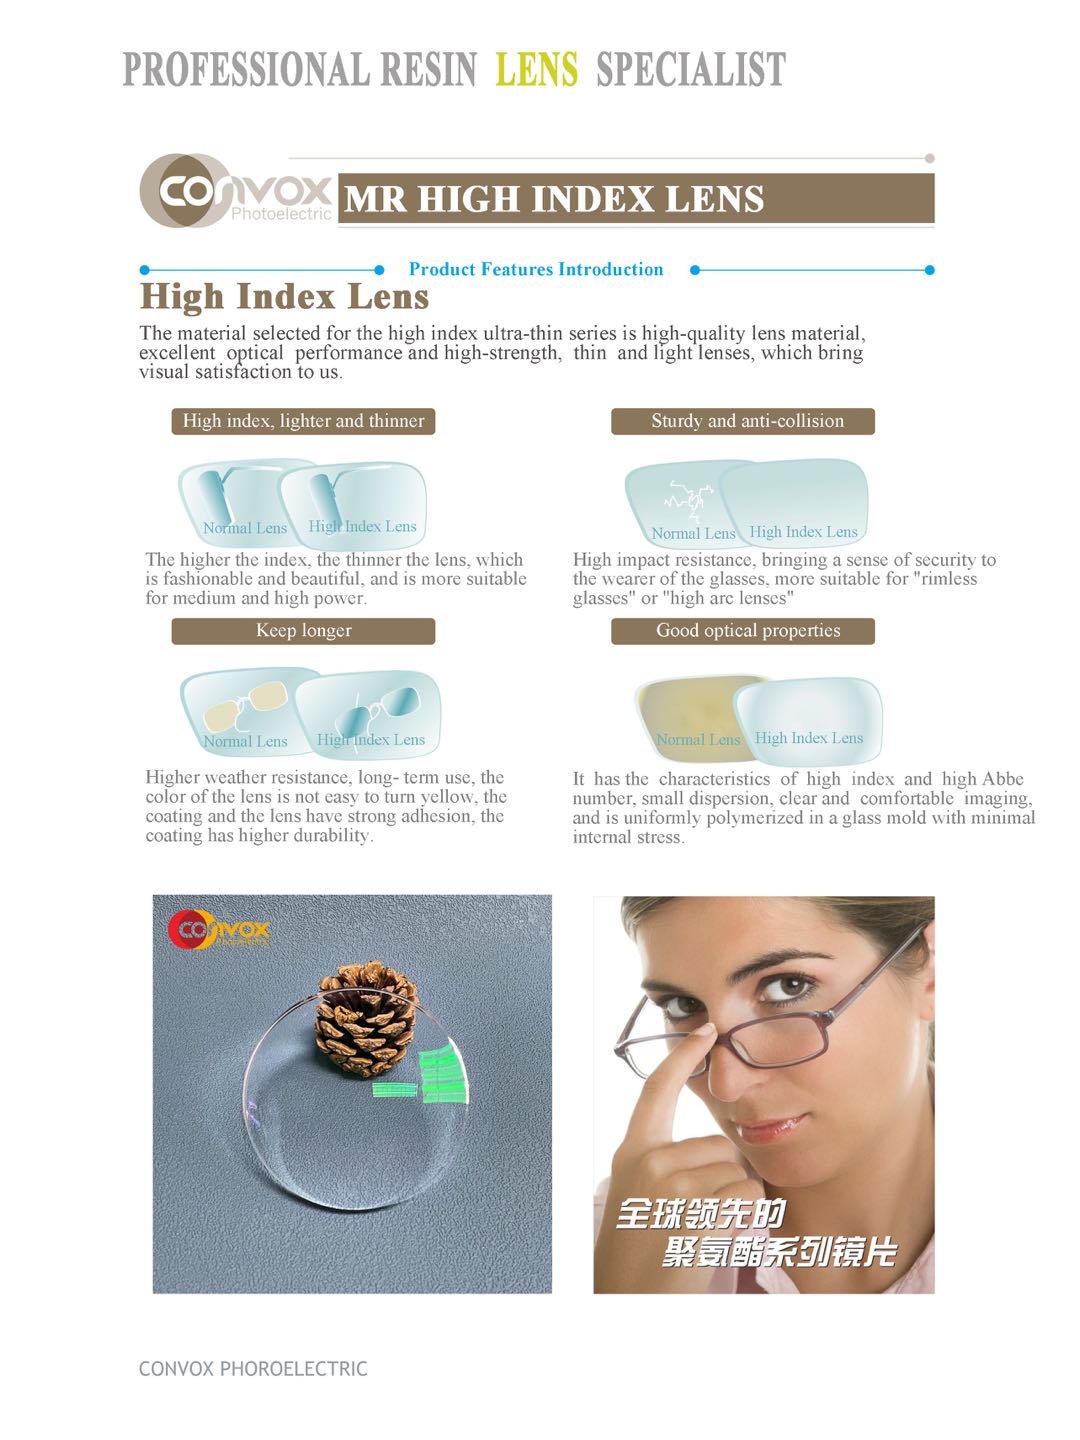 High Index Lens-Make Your Glasses More Beautiful